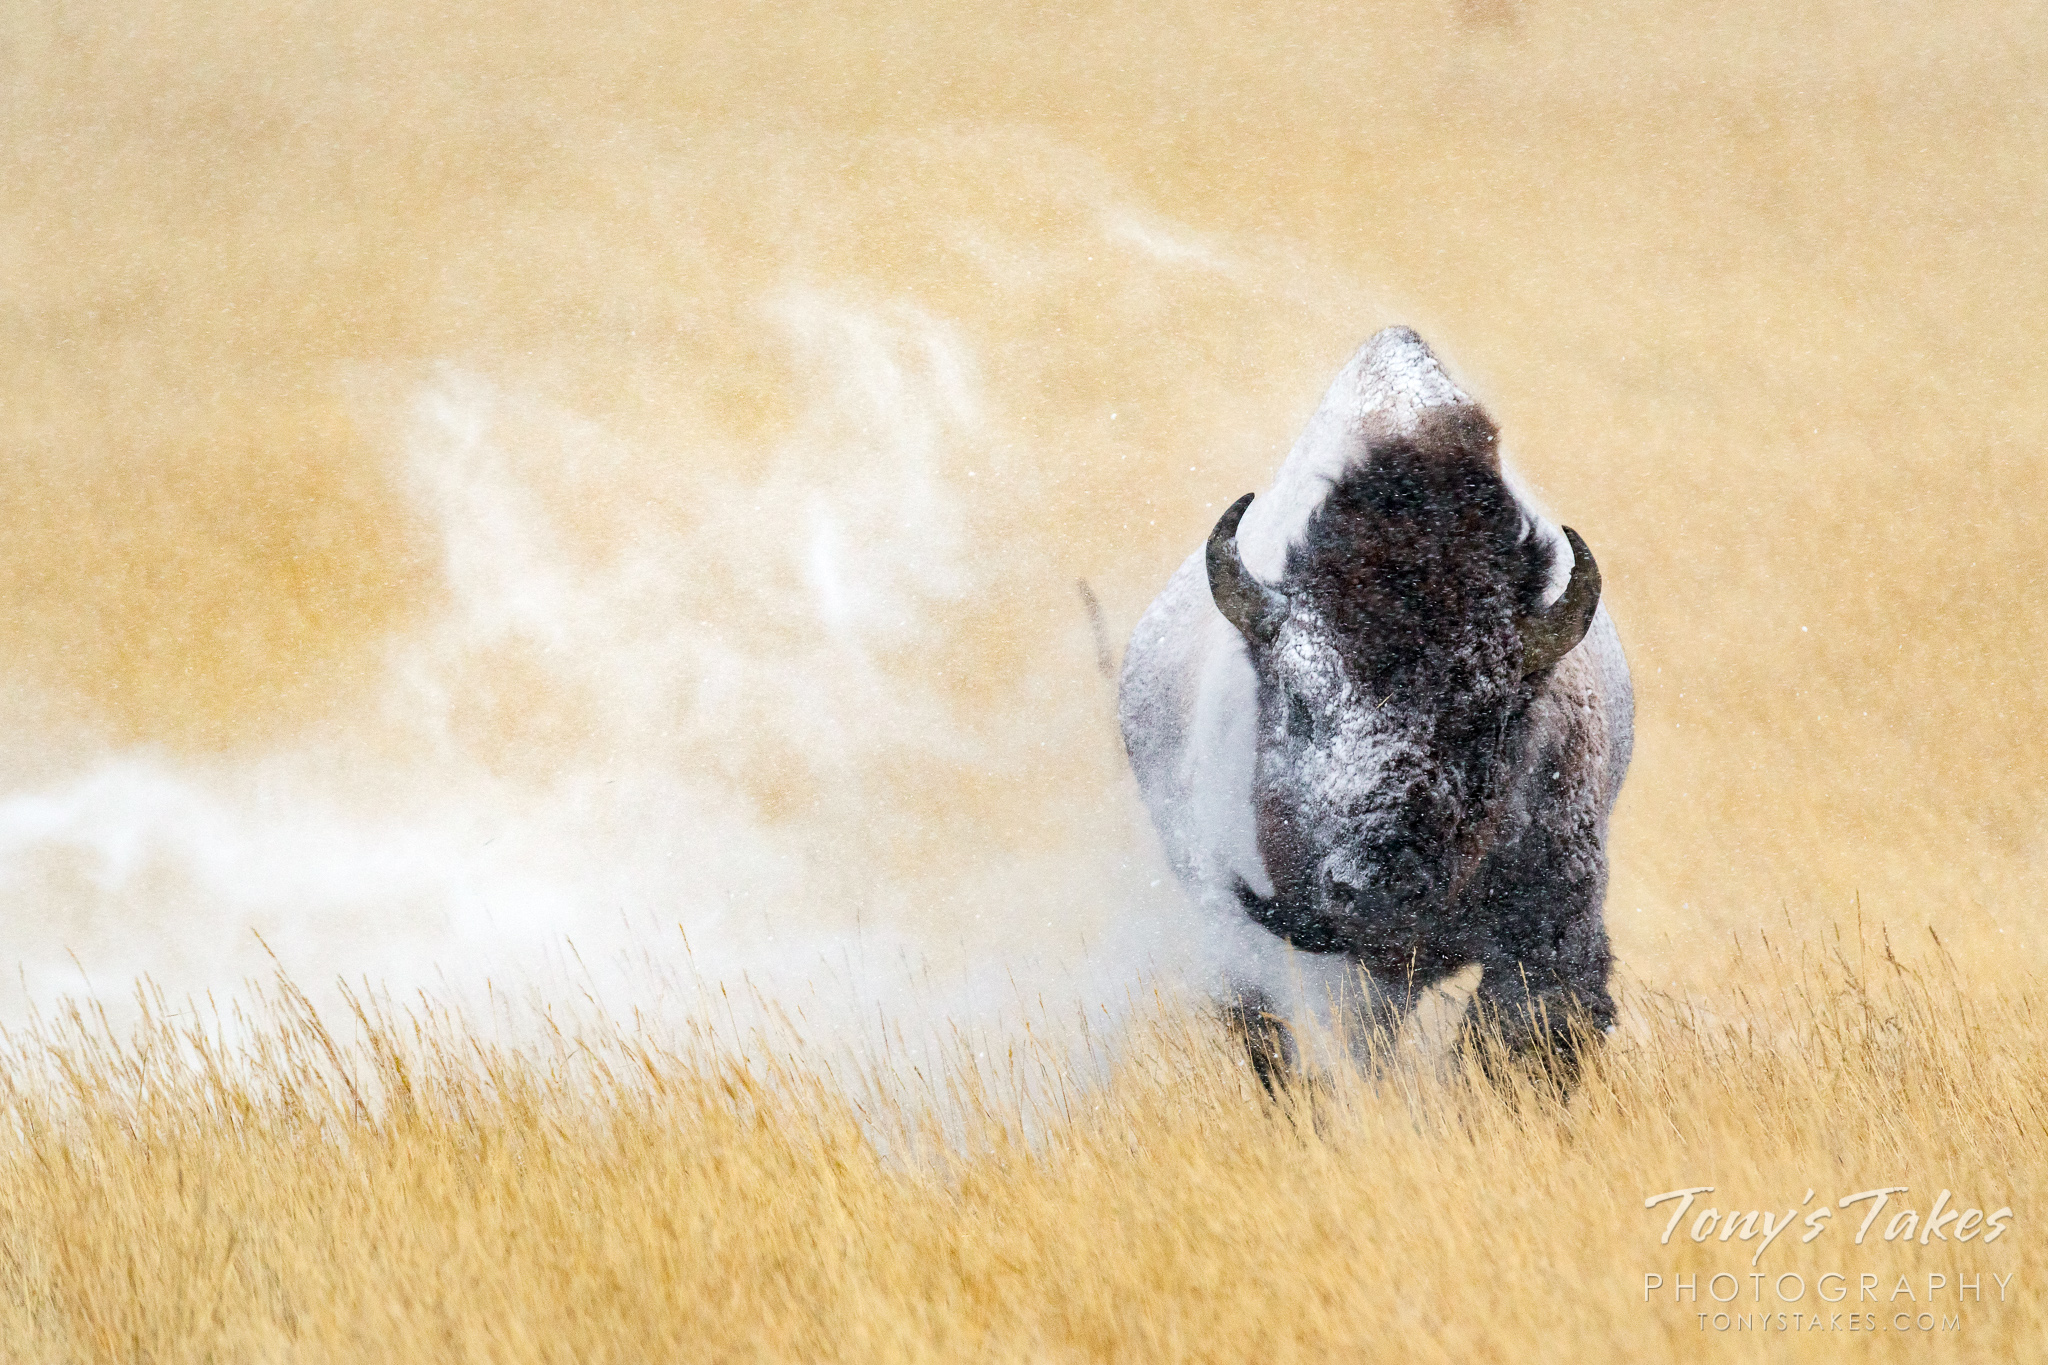 A bison bull shakes snow off his body at the Rocky Mountain Arsenal National Wildlife Refuge. (© Tony’s Takes)